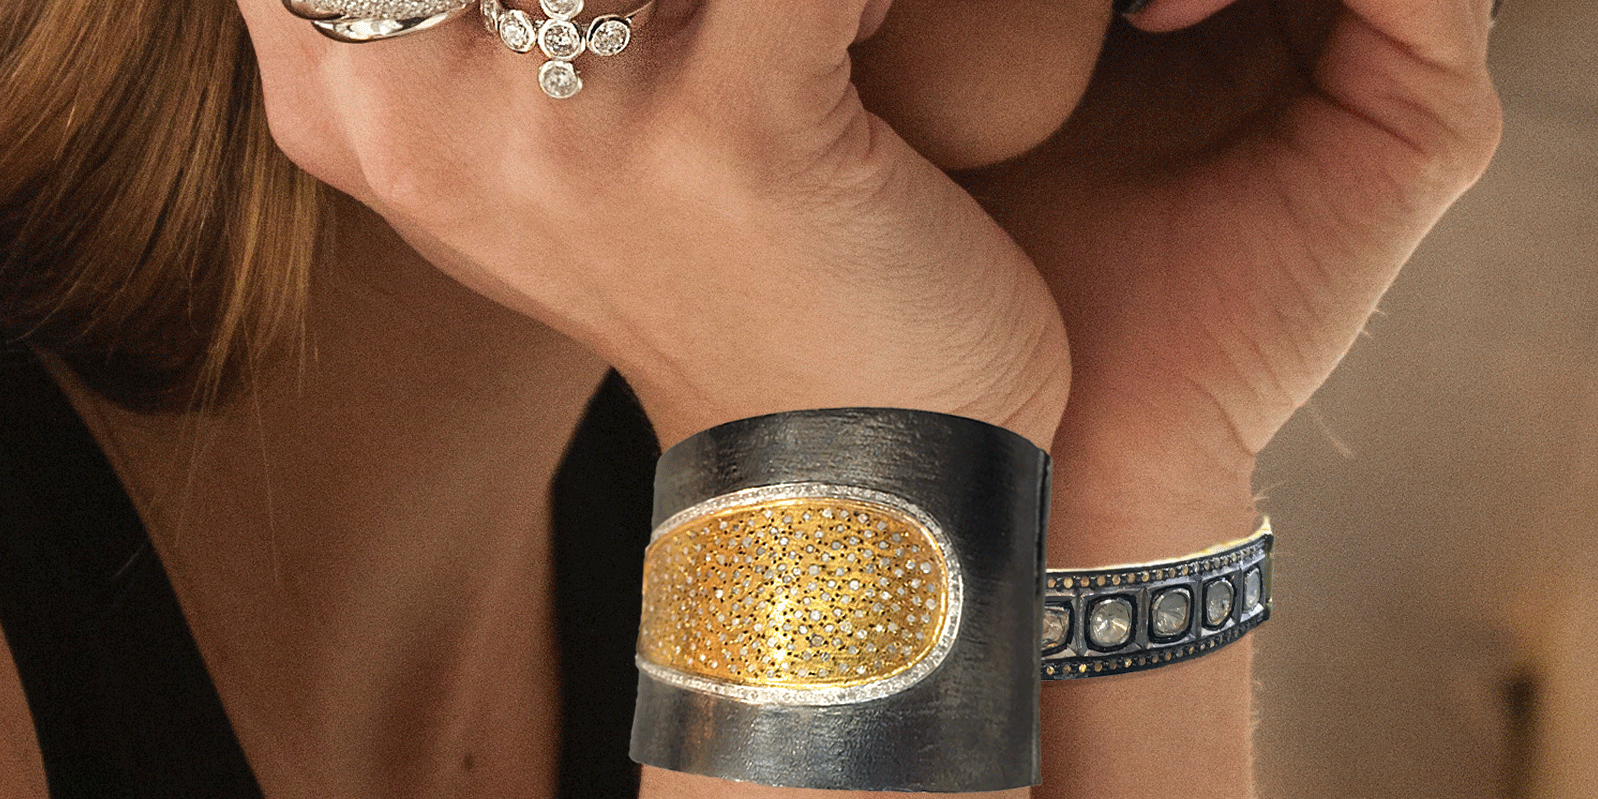 10 reasons cuffs are hot right now!